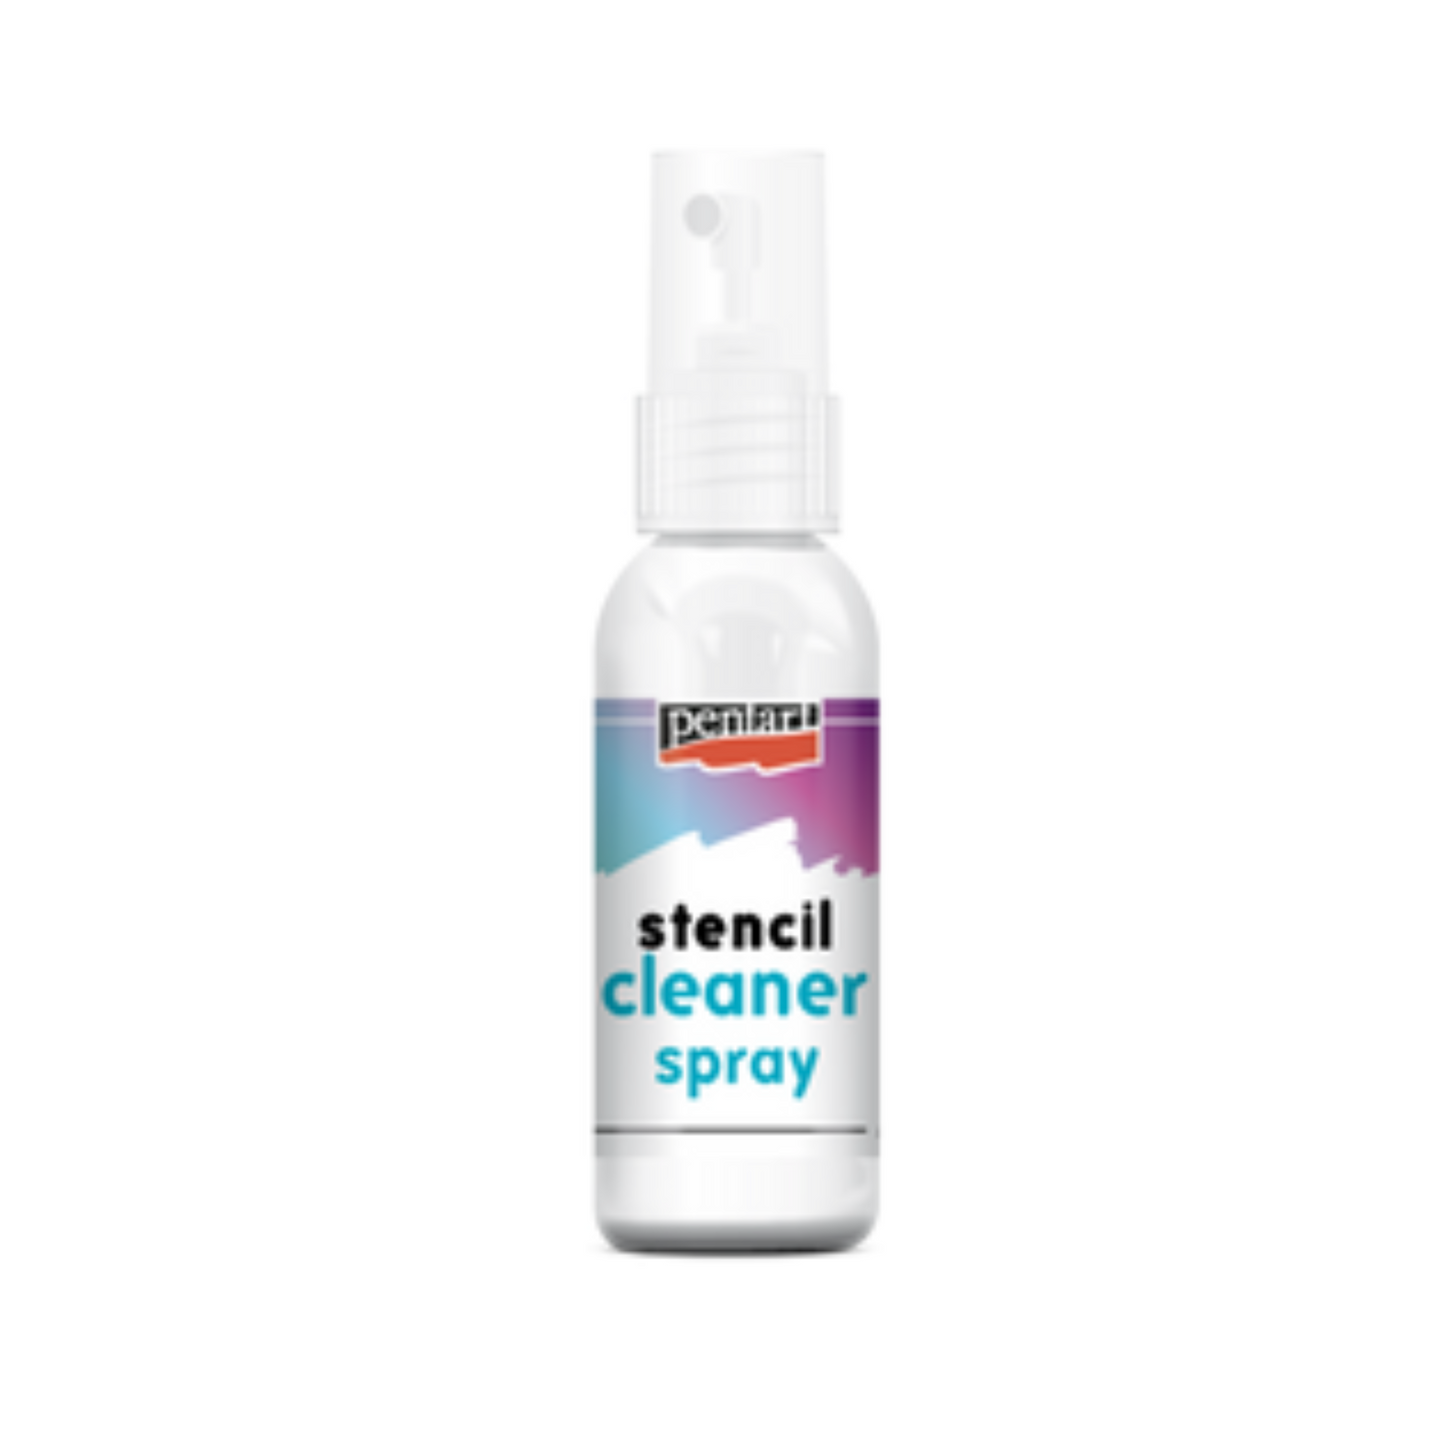 Stencil Cleaner Spray by Pentart available at Milton's Daughter.